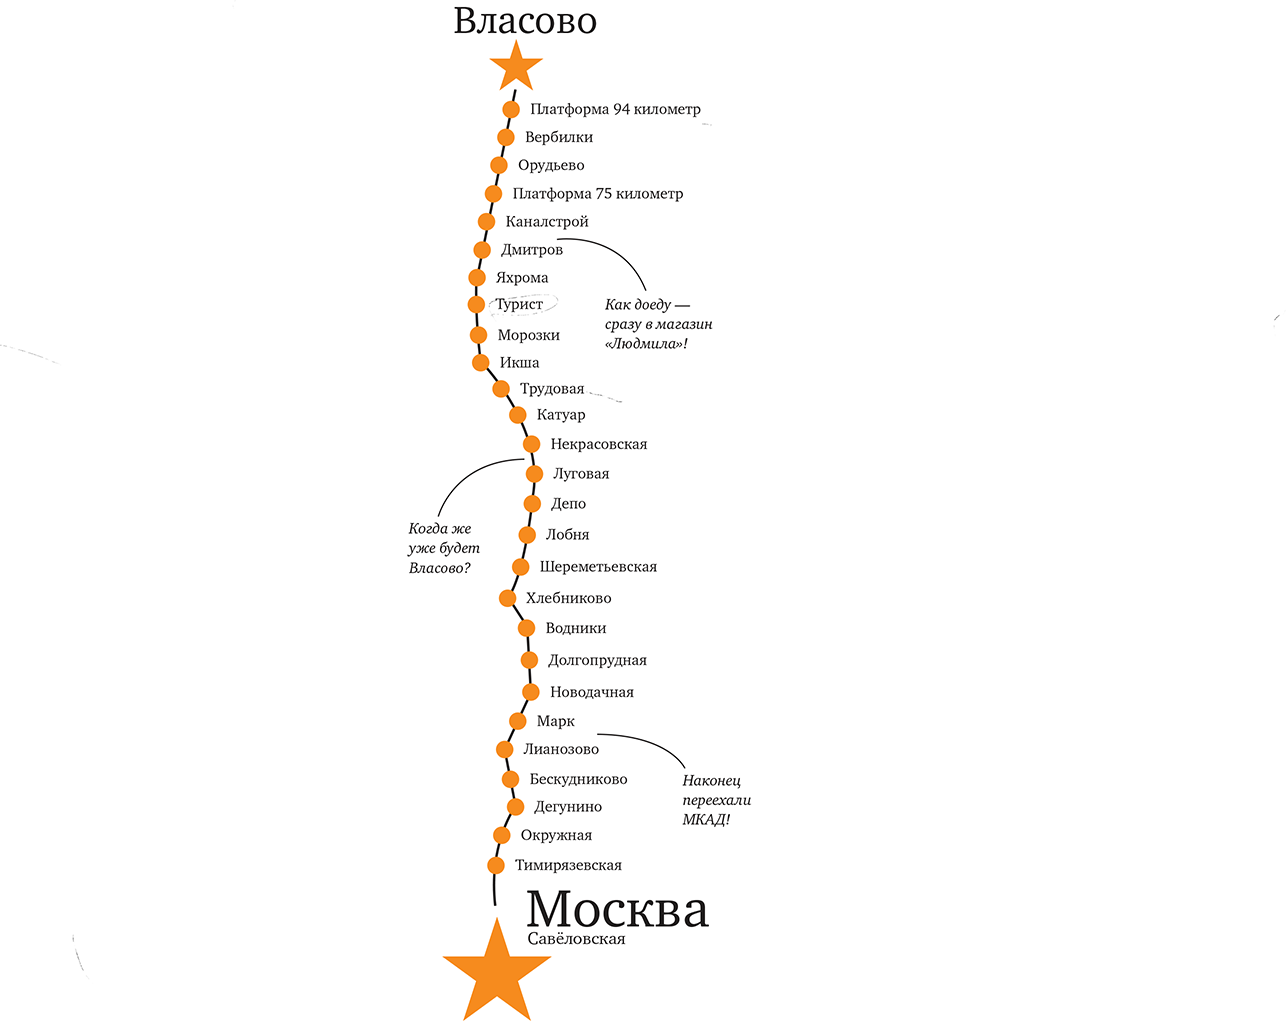 railway background image — it takes around 2 hours to get to Vlasovo from Savelovo station. It is situated around 100 km to the north from Moscow